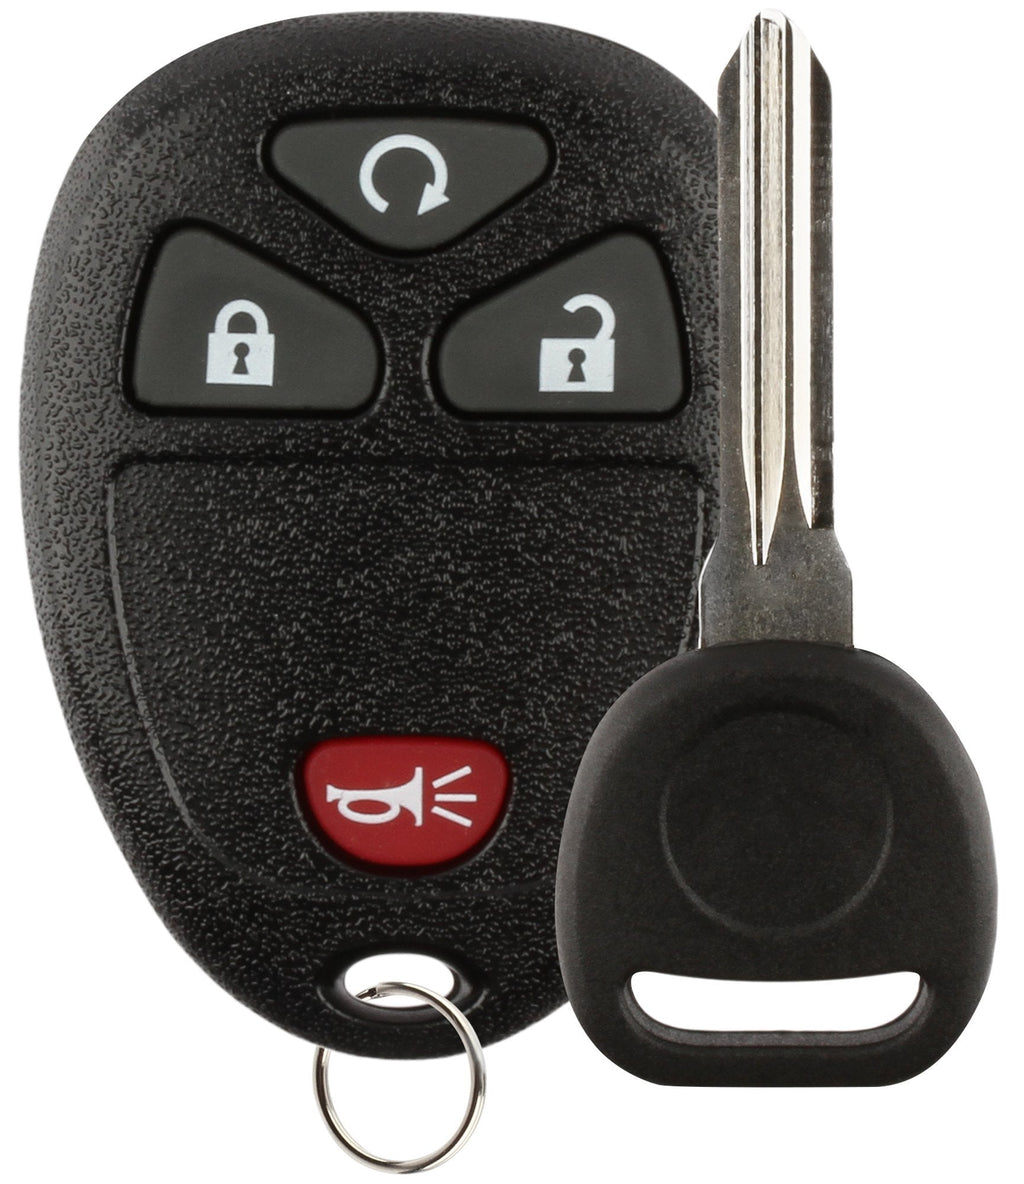  [AUSTRALIA] - Discount Keyless Replacement 4 Button Automotive Keyless Entry Remote Control Transmitter 15913421 and a Replacement ID 46 Transponder Key Black w/Key 1 Set